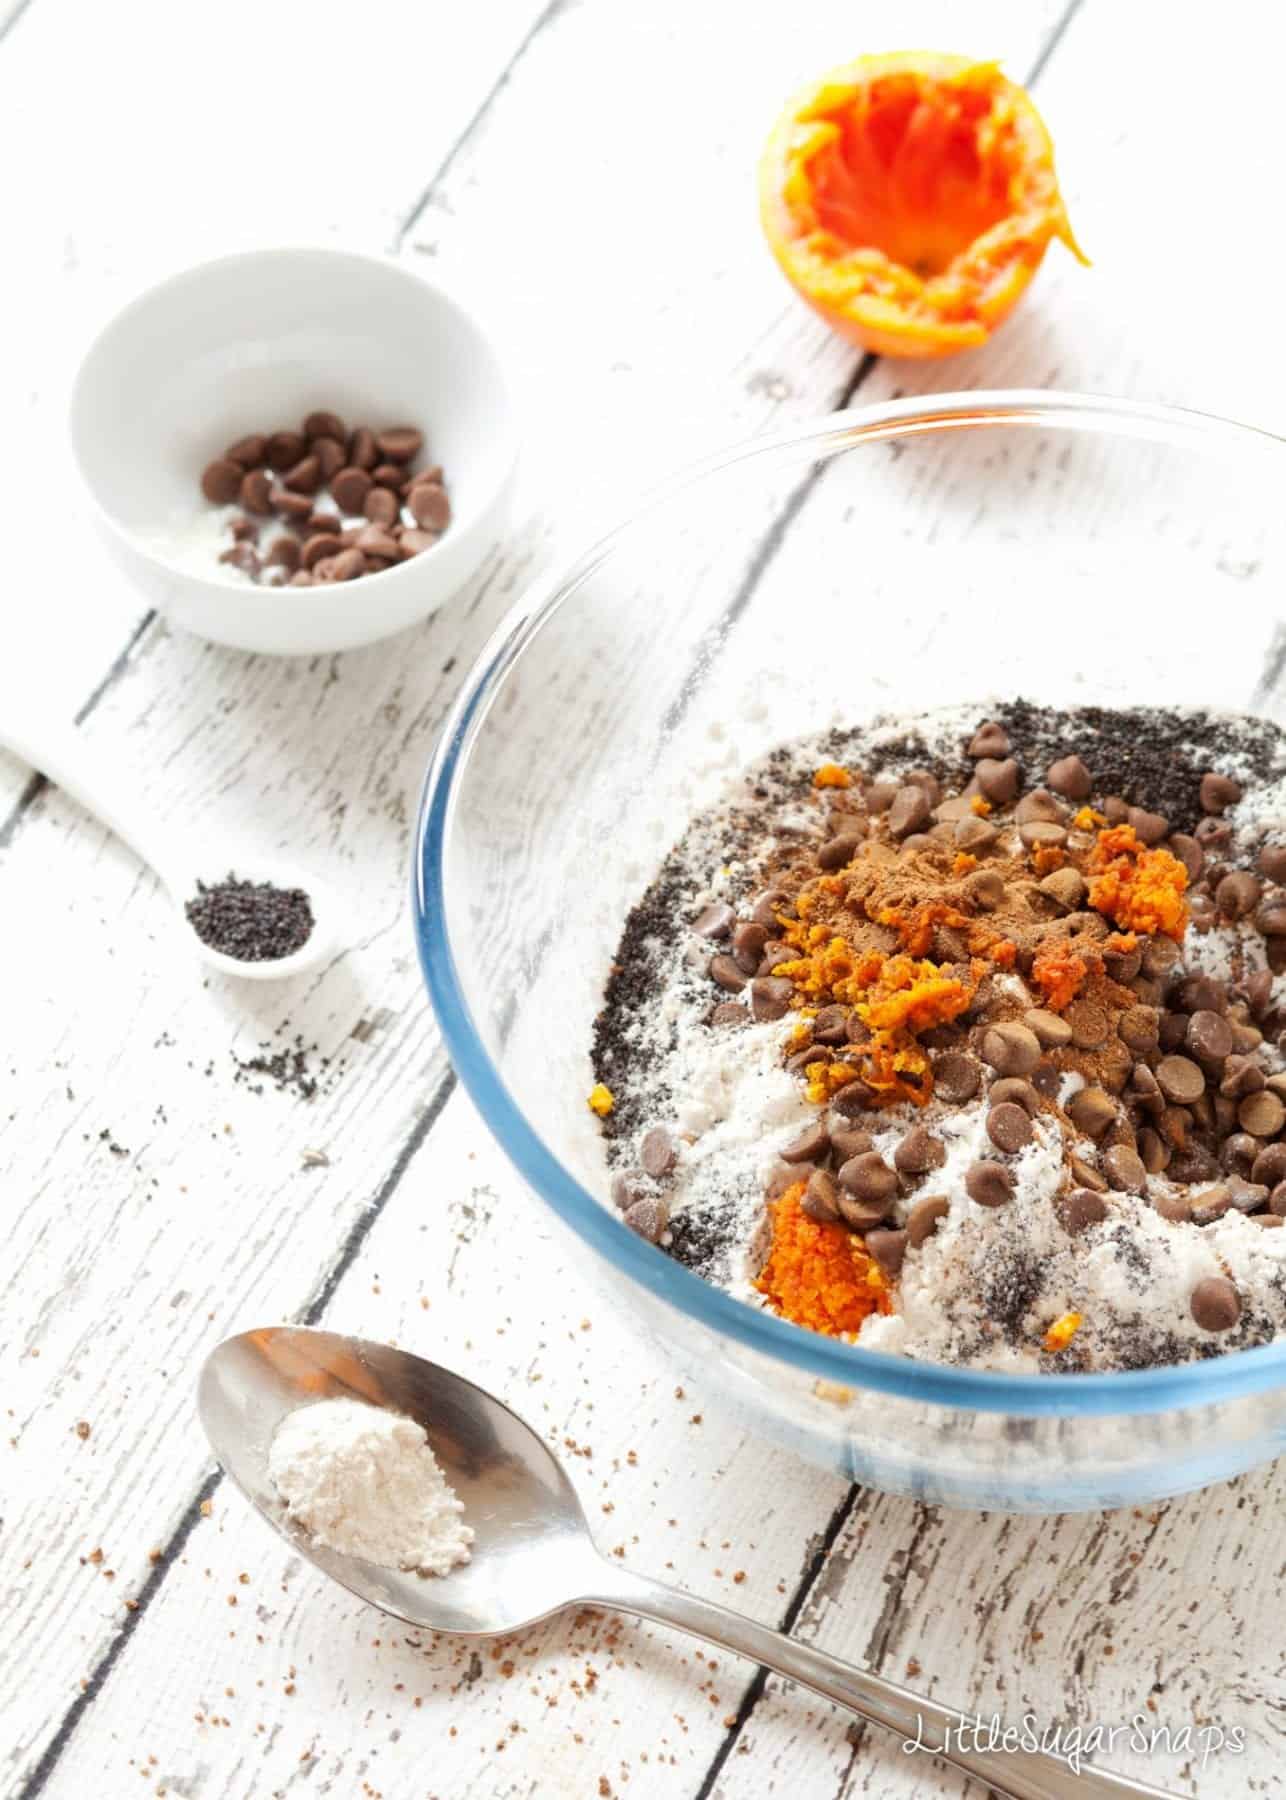 Dry ingredients for muffins in a mixing bowl: flour, orange zest, chocolate chips